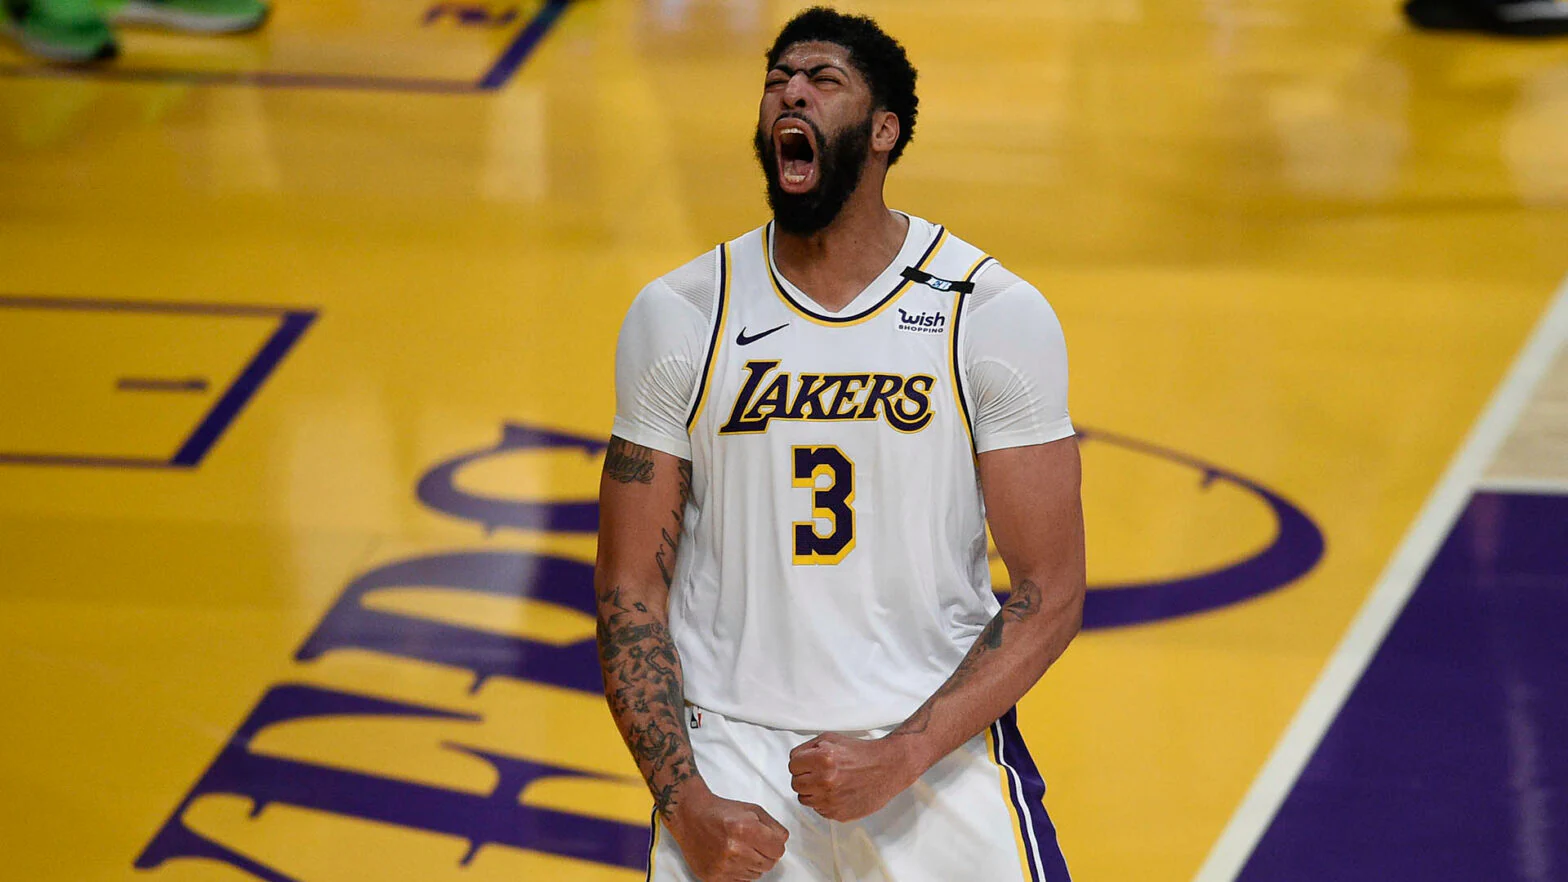 “With Lebron James Out, Anthony Davis Will Step Up!”: Lakers Legend on Ad’s Role Following ‘Massive’ $186,000,000 Extension